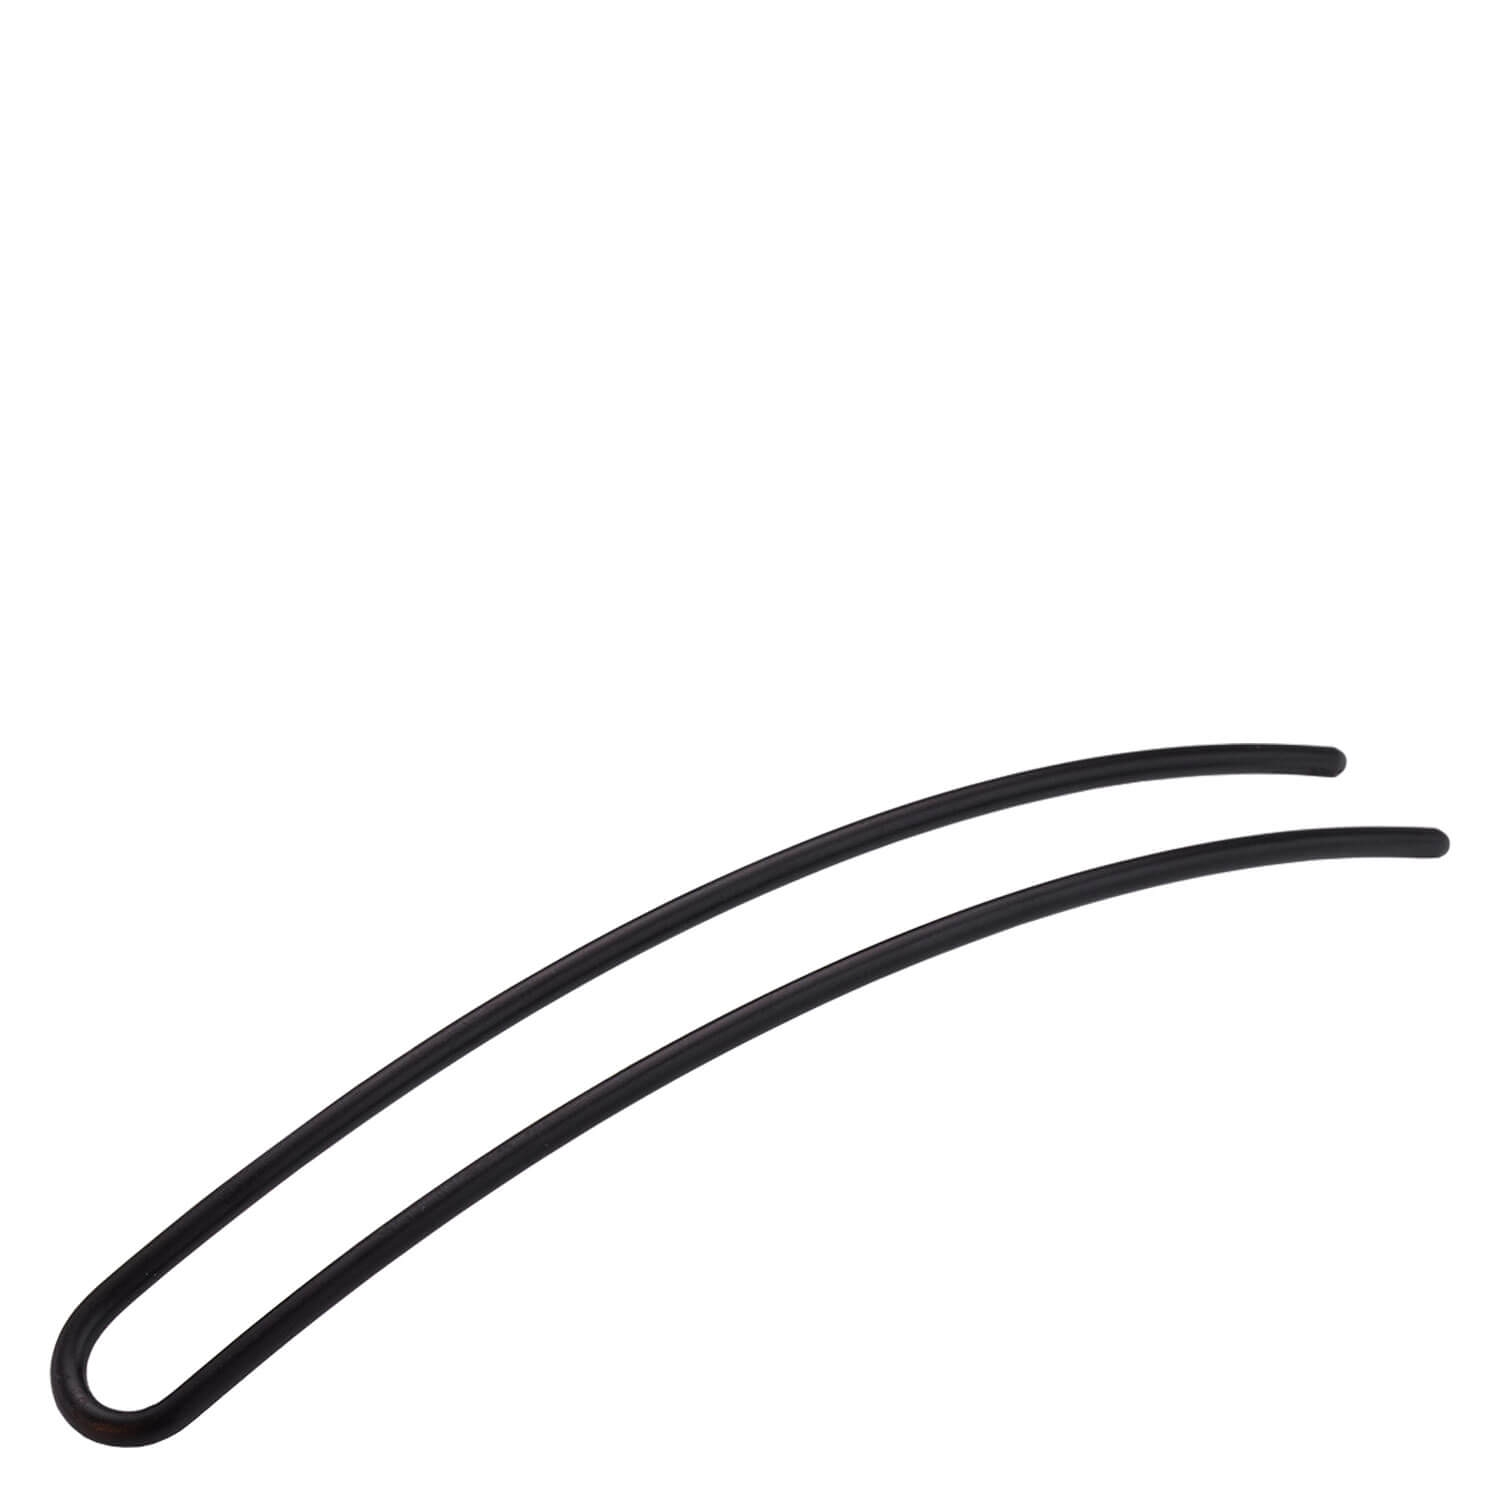 Product image from Corinne World - Hairpin Plain Black